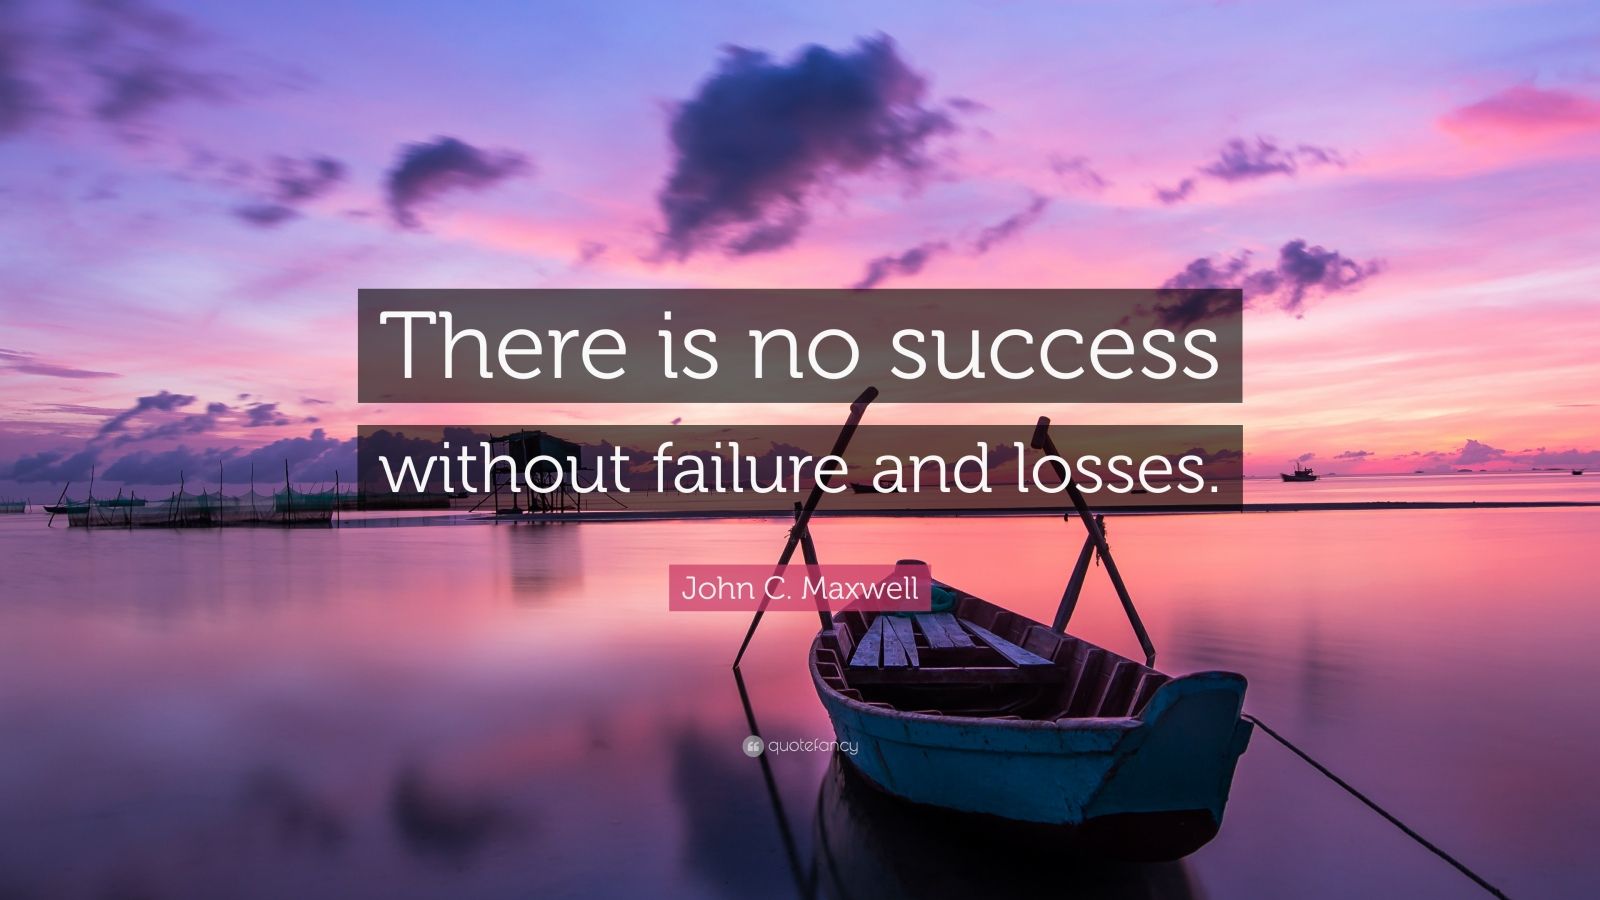 John C. Maxwell Quote: “There is no success without failure and losses